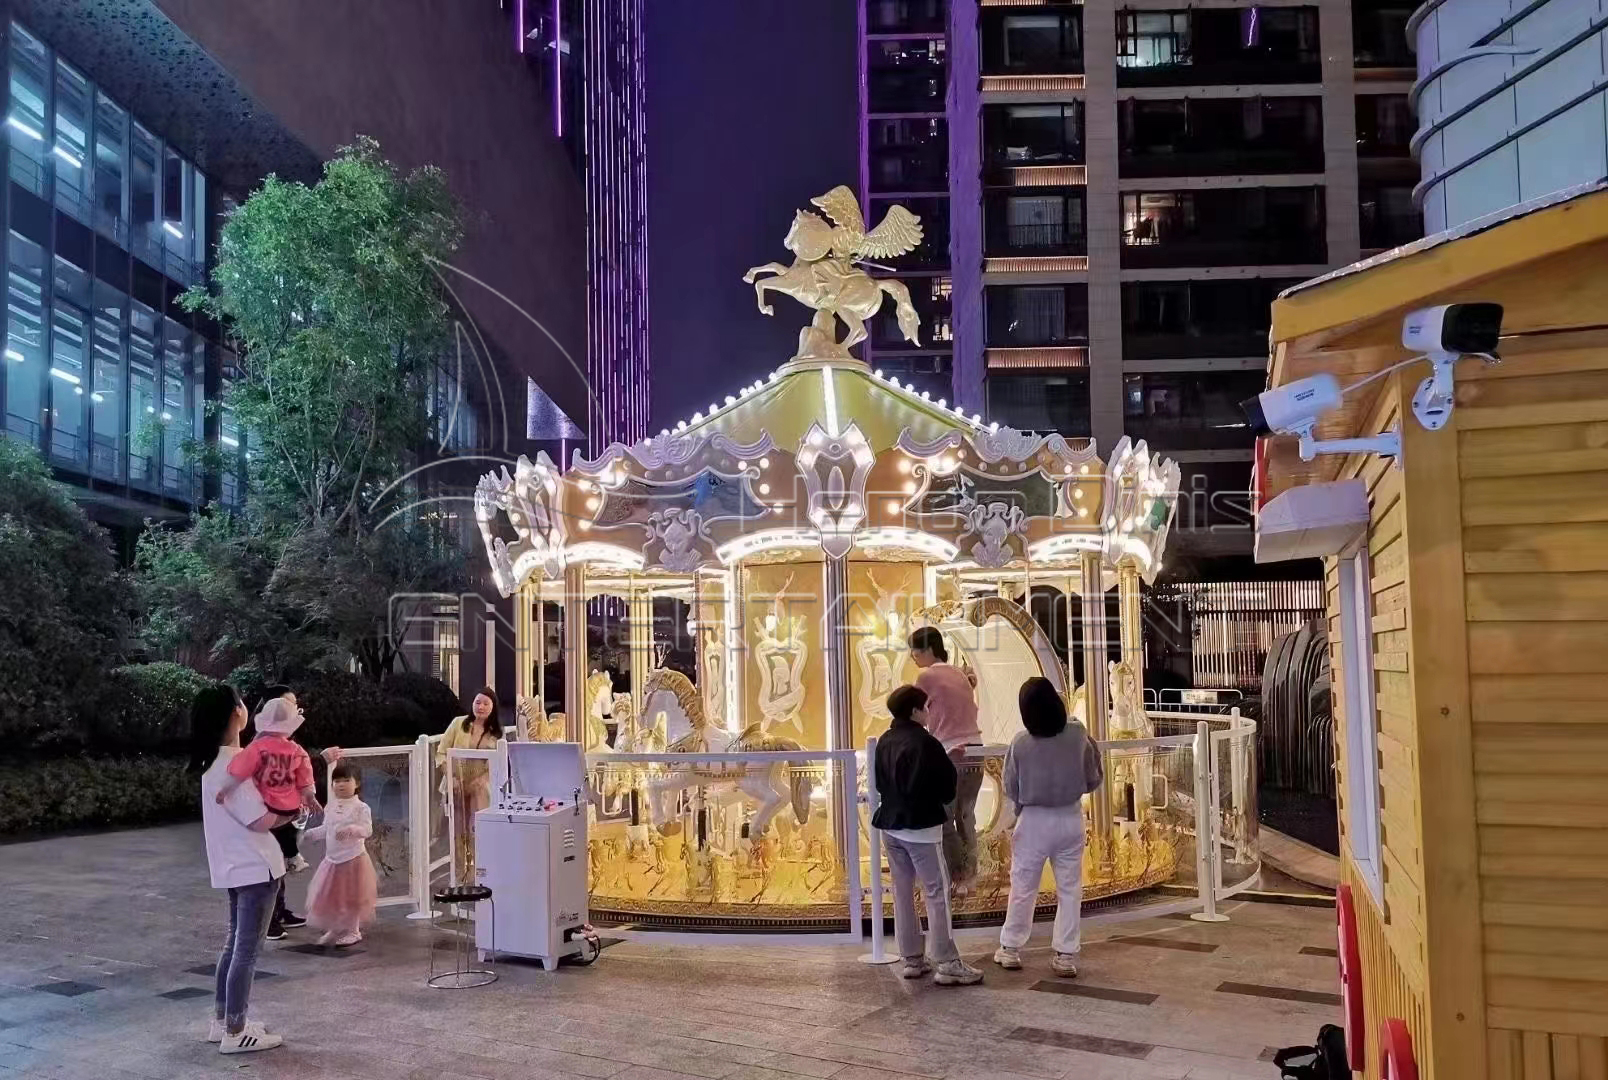 Reasons why the carousel can attract children to play